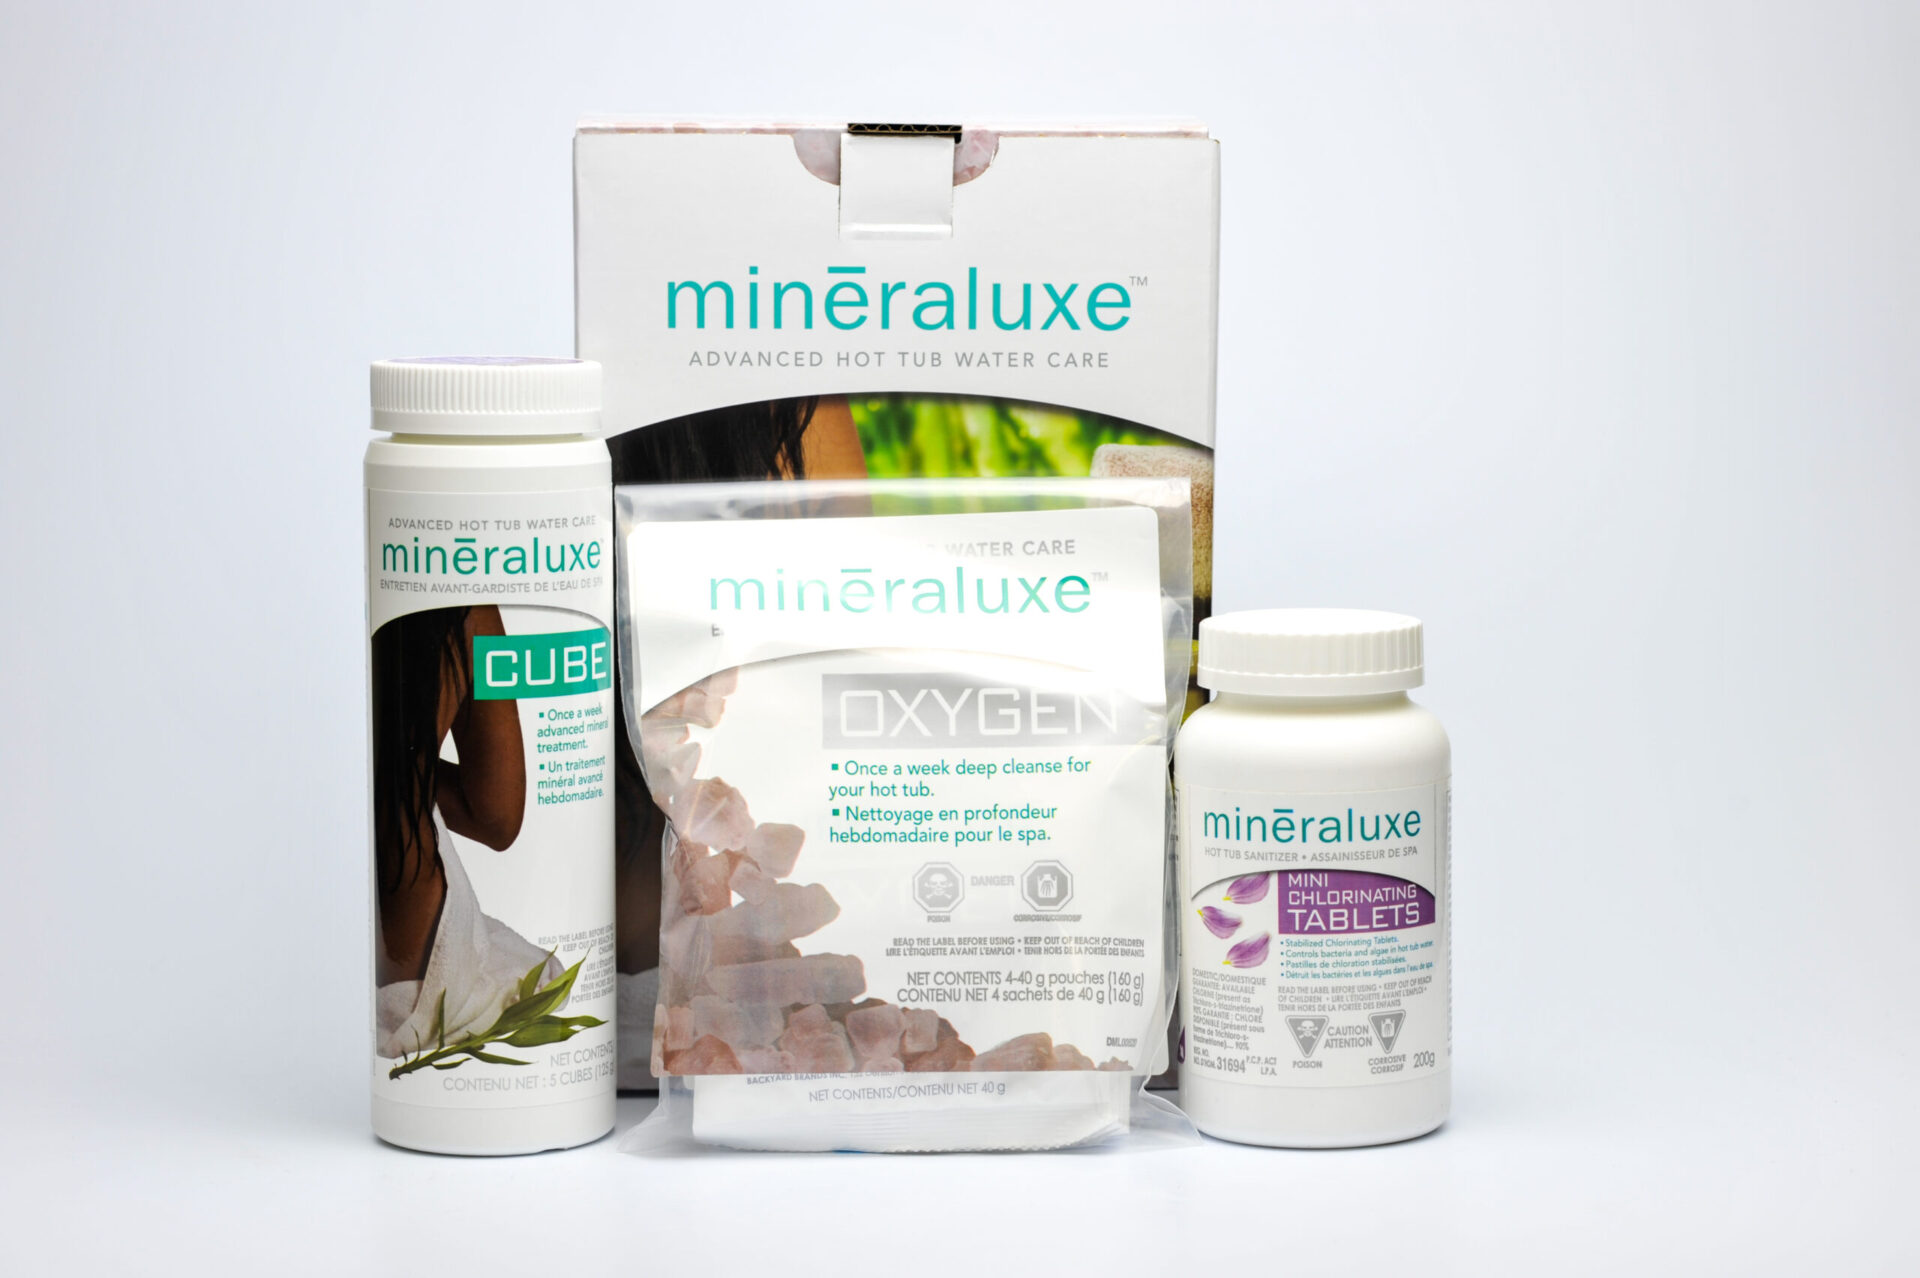 Mineraluxe One Month Chlorine Kit scaled - Mineraluxe One Month Chlorine Kit